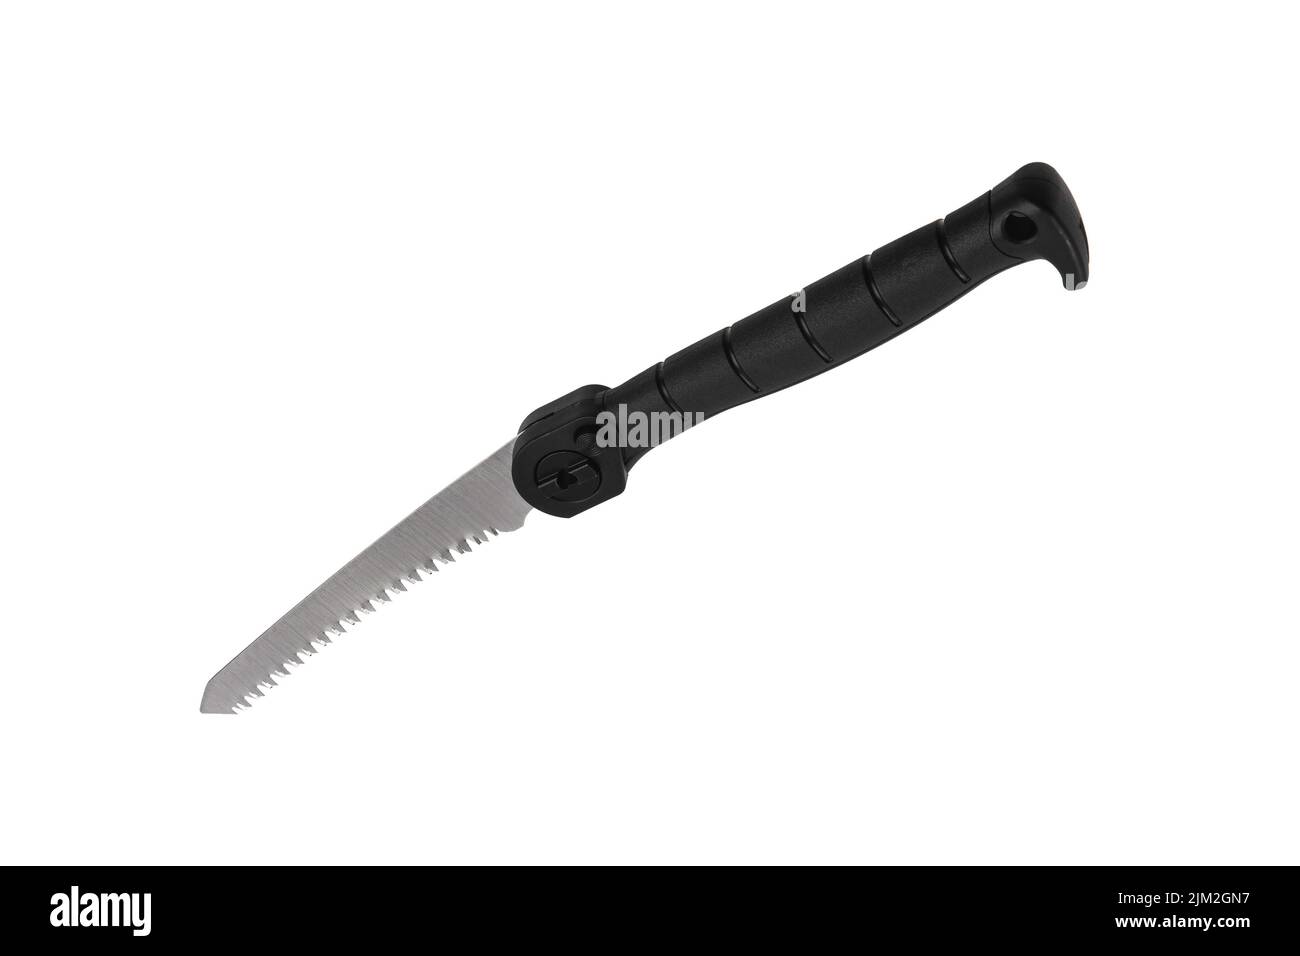 Small portable folding hacksaw. Saw for sawing small branches or boards. Garden or travel tool. Isolate on a white background. Stock Photo